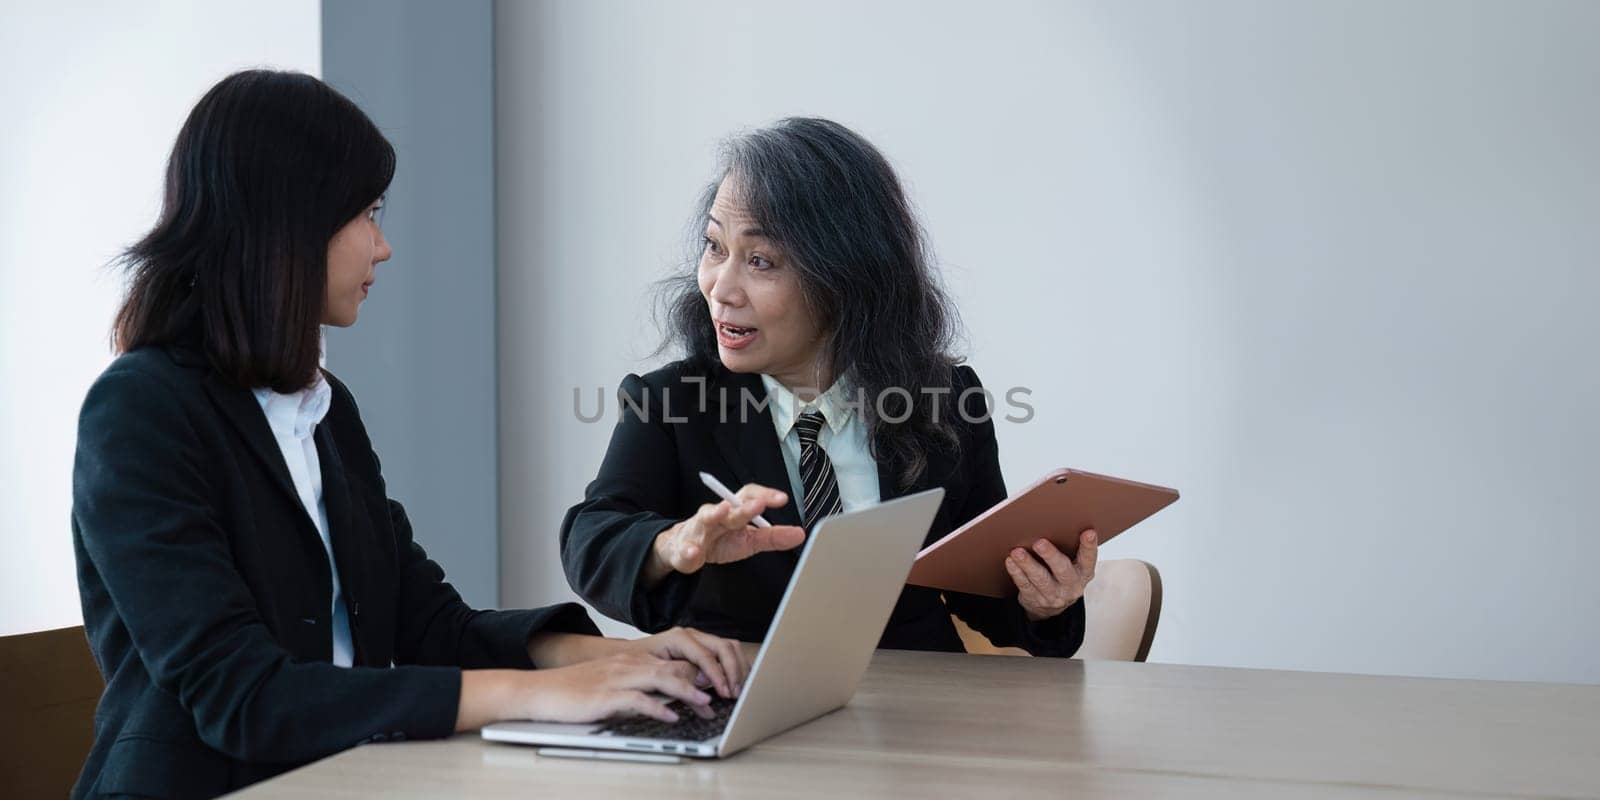 senior business professional woman talking to younger female colleague at office table, speaking, gesturing, teaching, explaining work tasks.